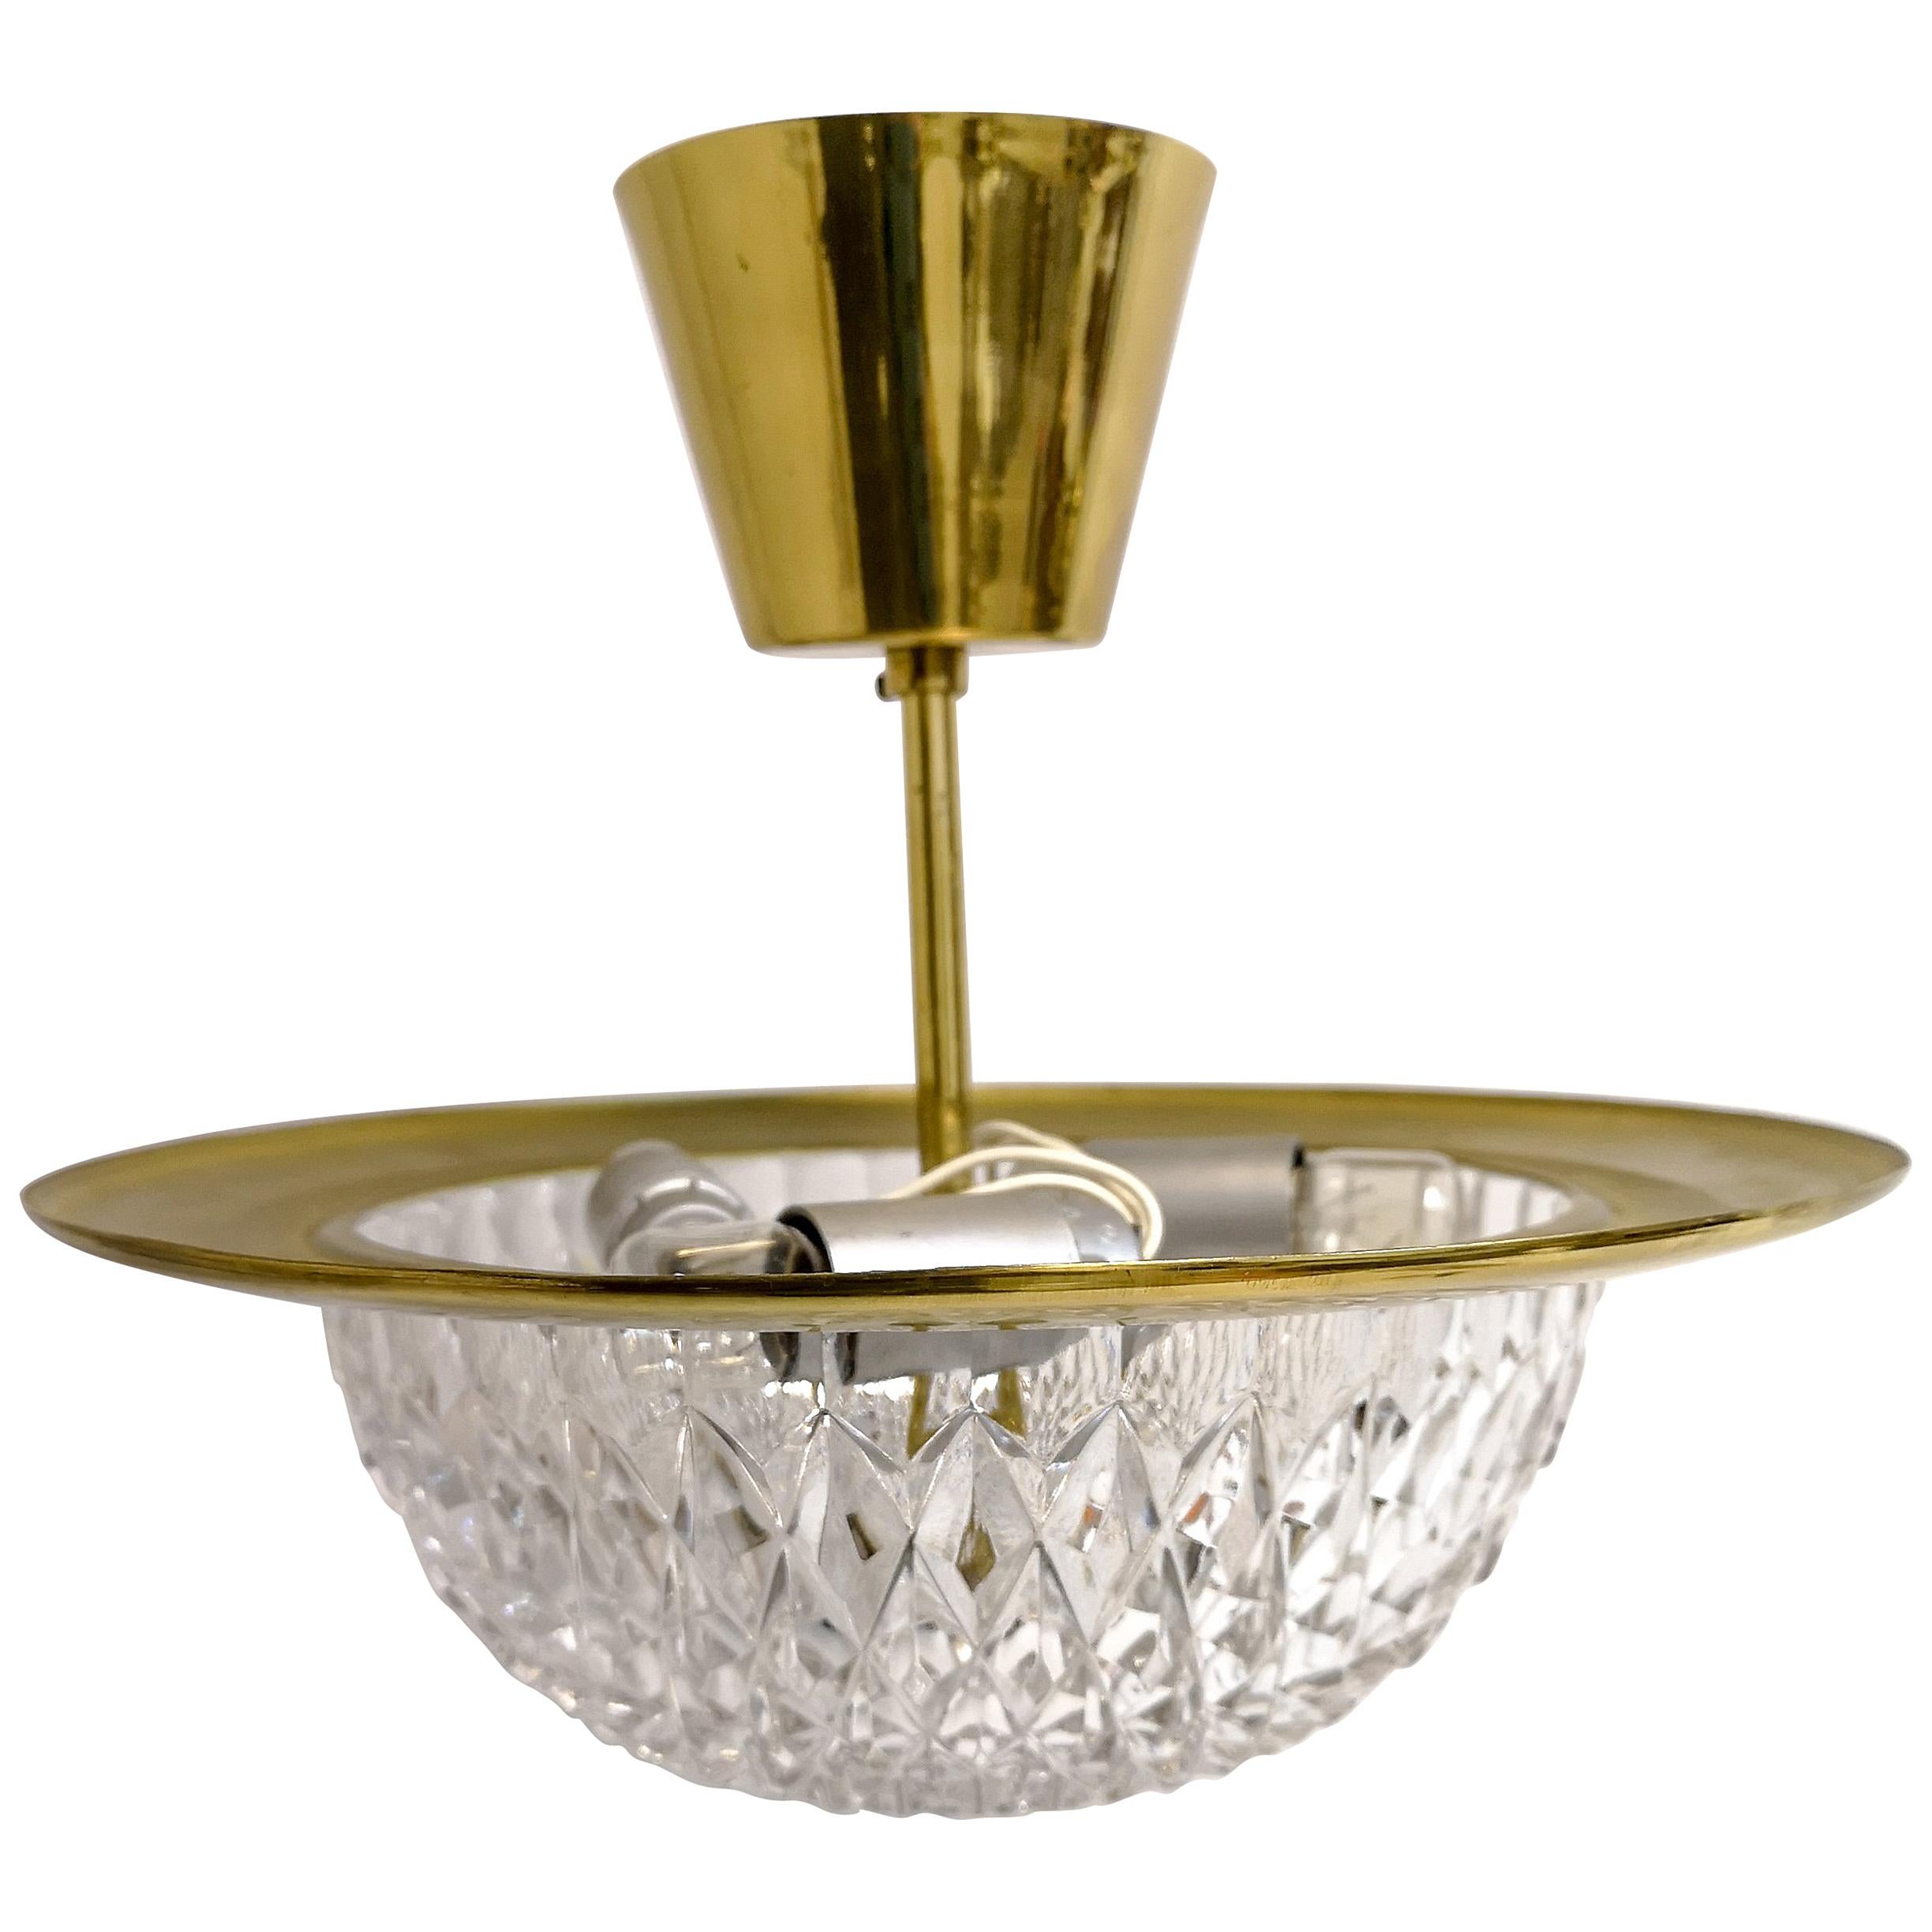 1960s, Brass and Crystal Celling Lamp by Tyringe for Orrefors, Sweden For Sale